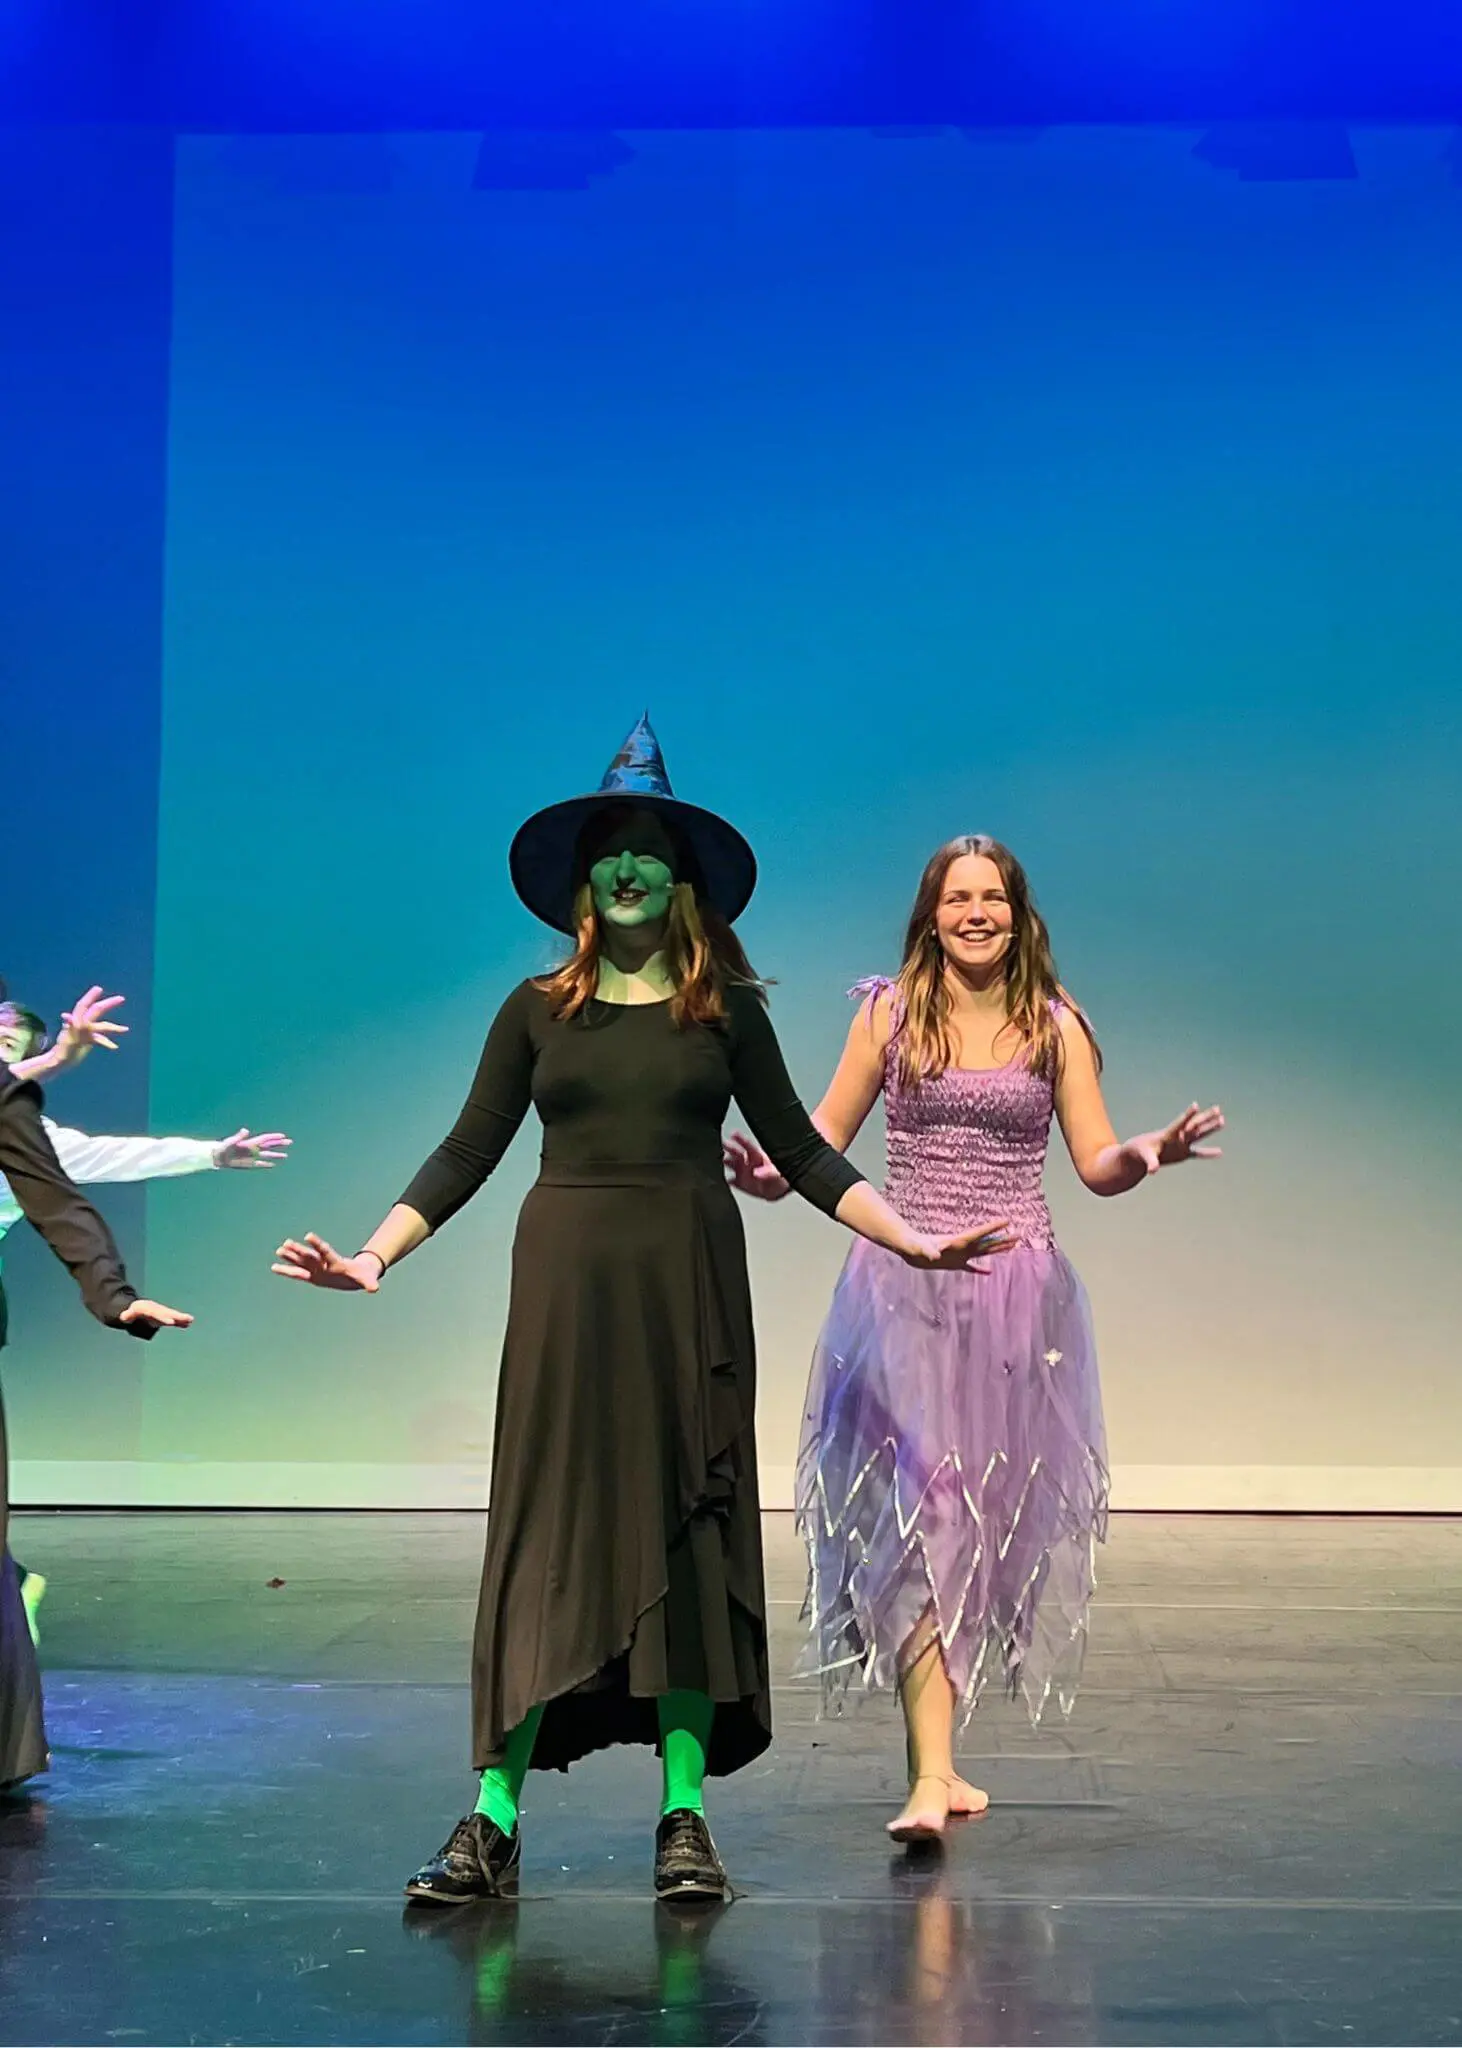 Senior pupils did a performance on the play called wicked at Ibstock Place School, a private school near Richmond, Barnes, Putney, Kingston, and Wandsworth on an overseas trip. 